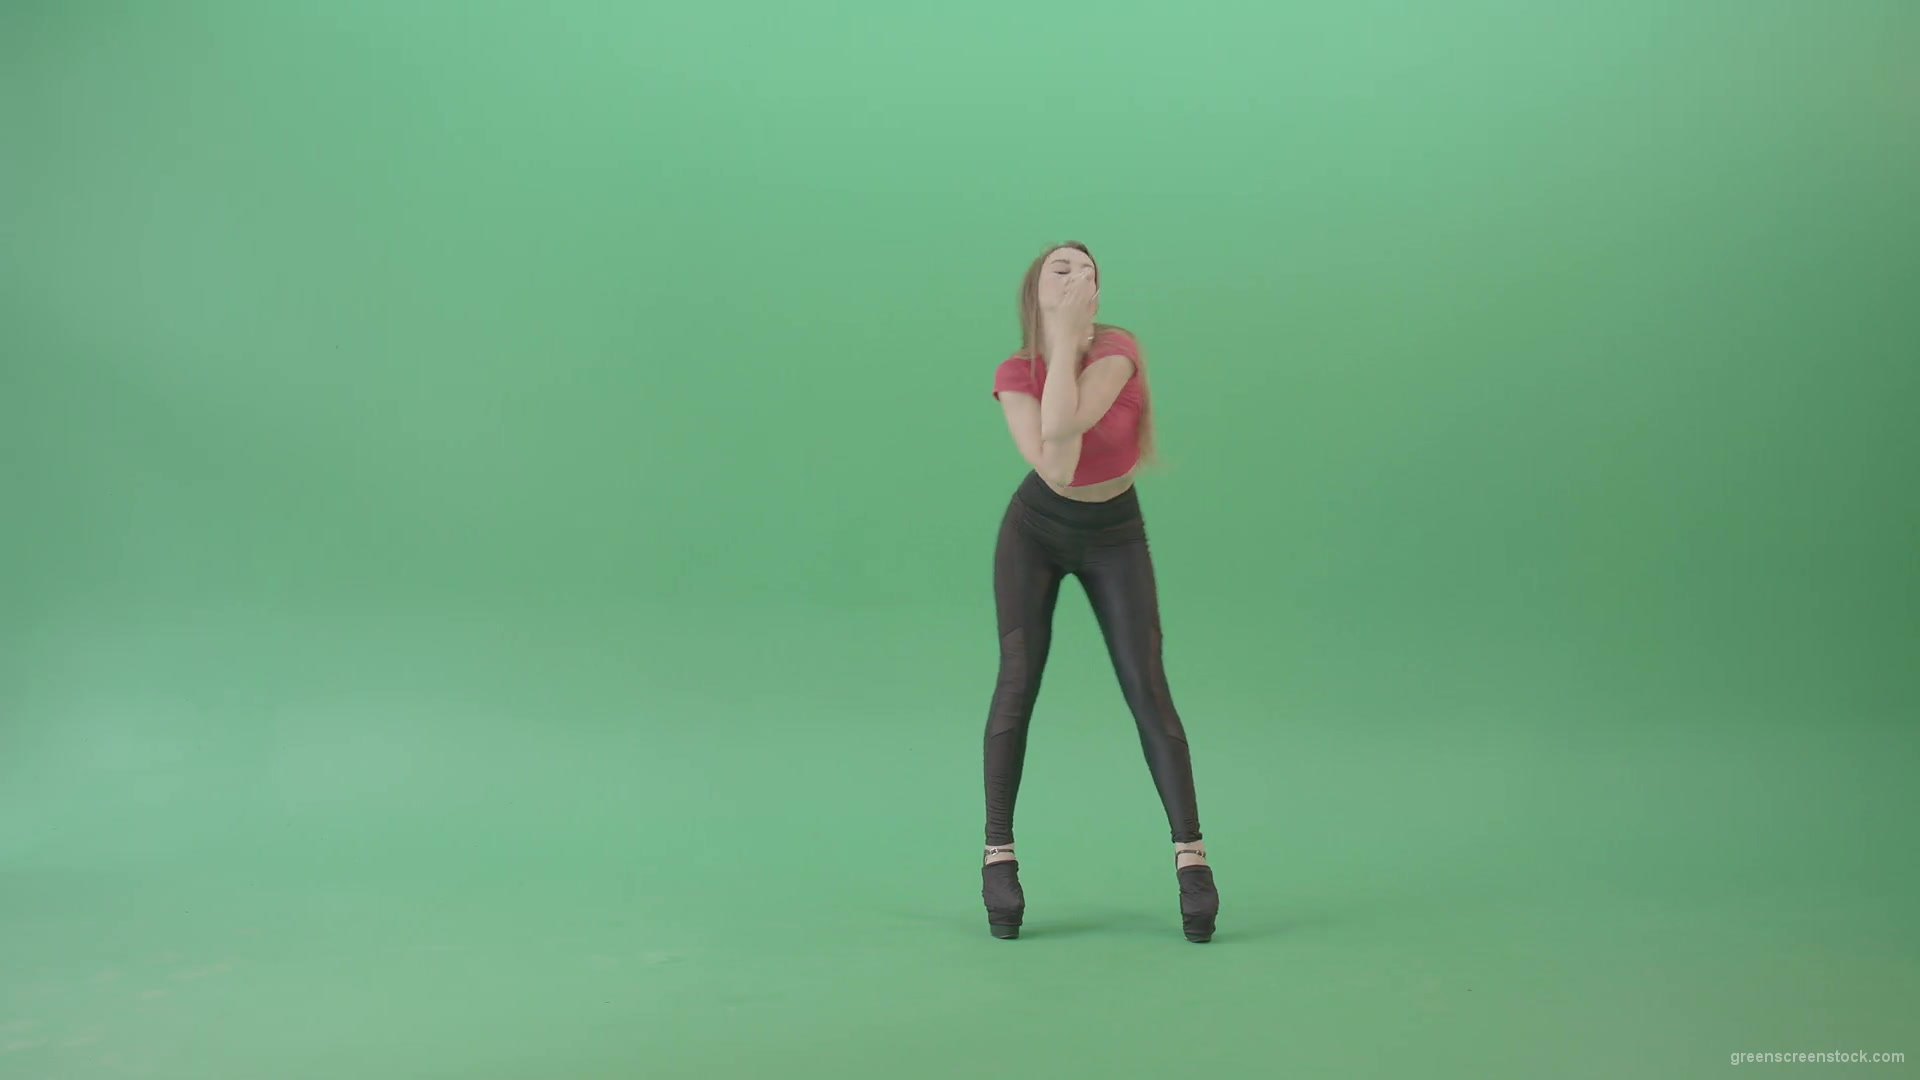 Passion-sexy-girl-on-green-screen-in-red-posing-strip-dance-4K-Video-Footage-1920_002 Green Screen Stock